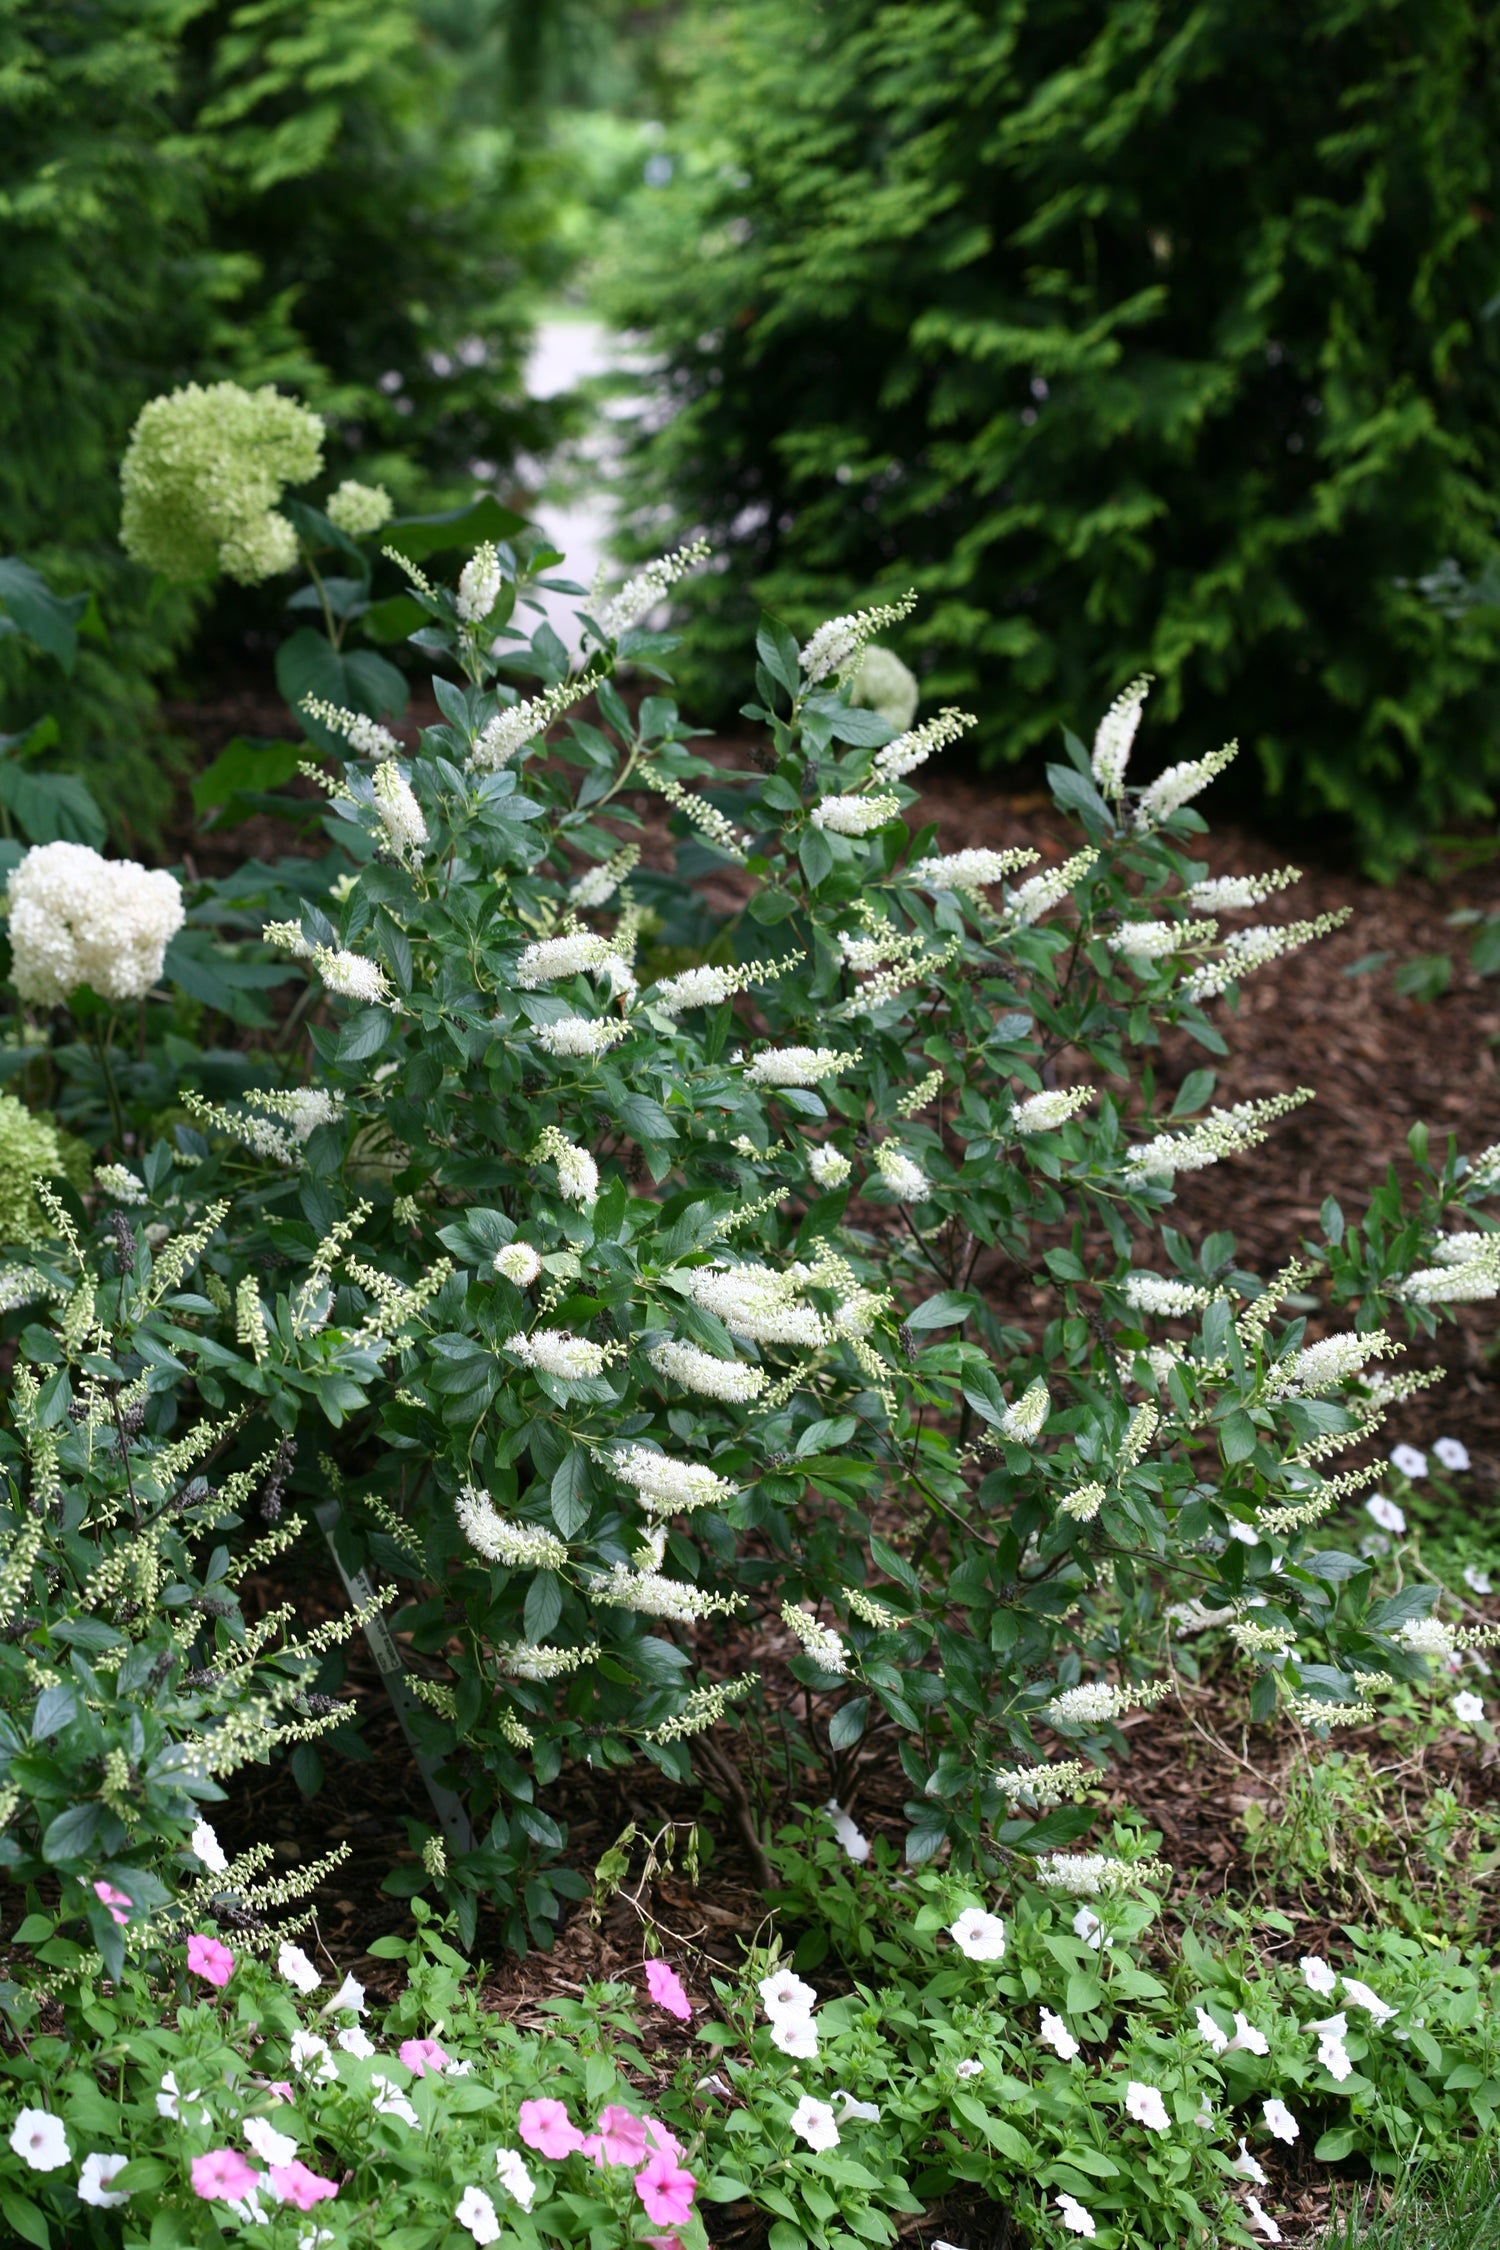 Sugartina Crystalina Summersweet growing in a garden with annuals, Hydrangea, and Arborvitae